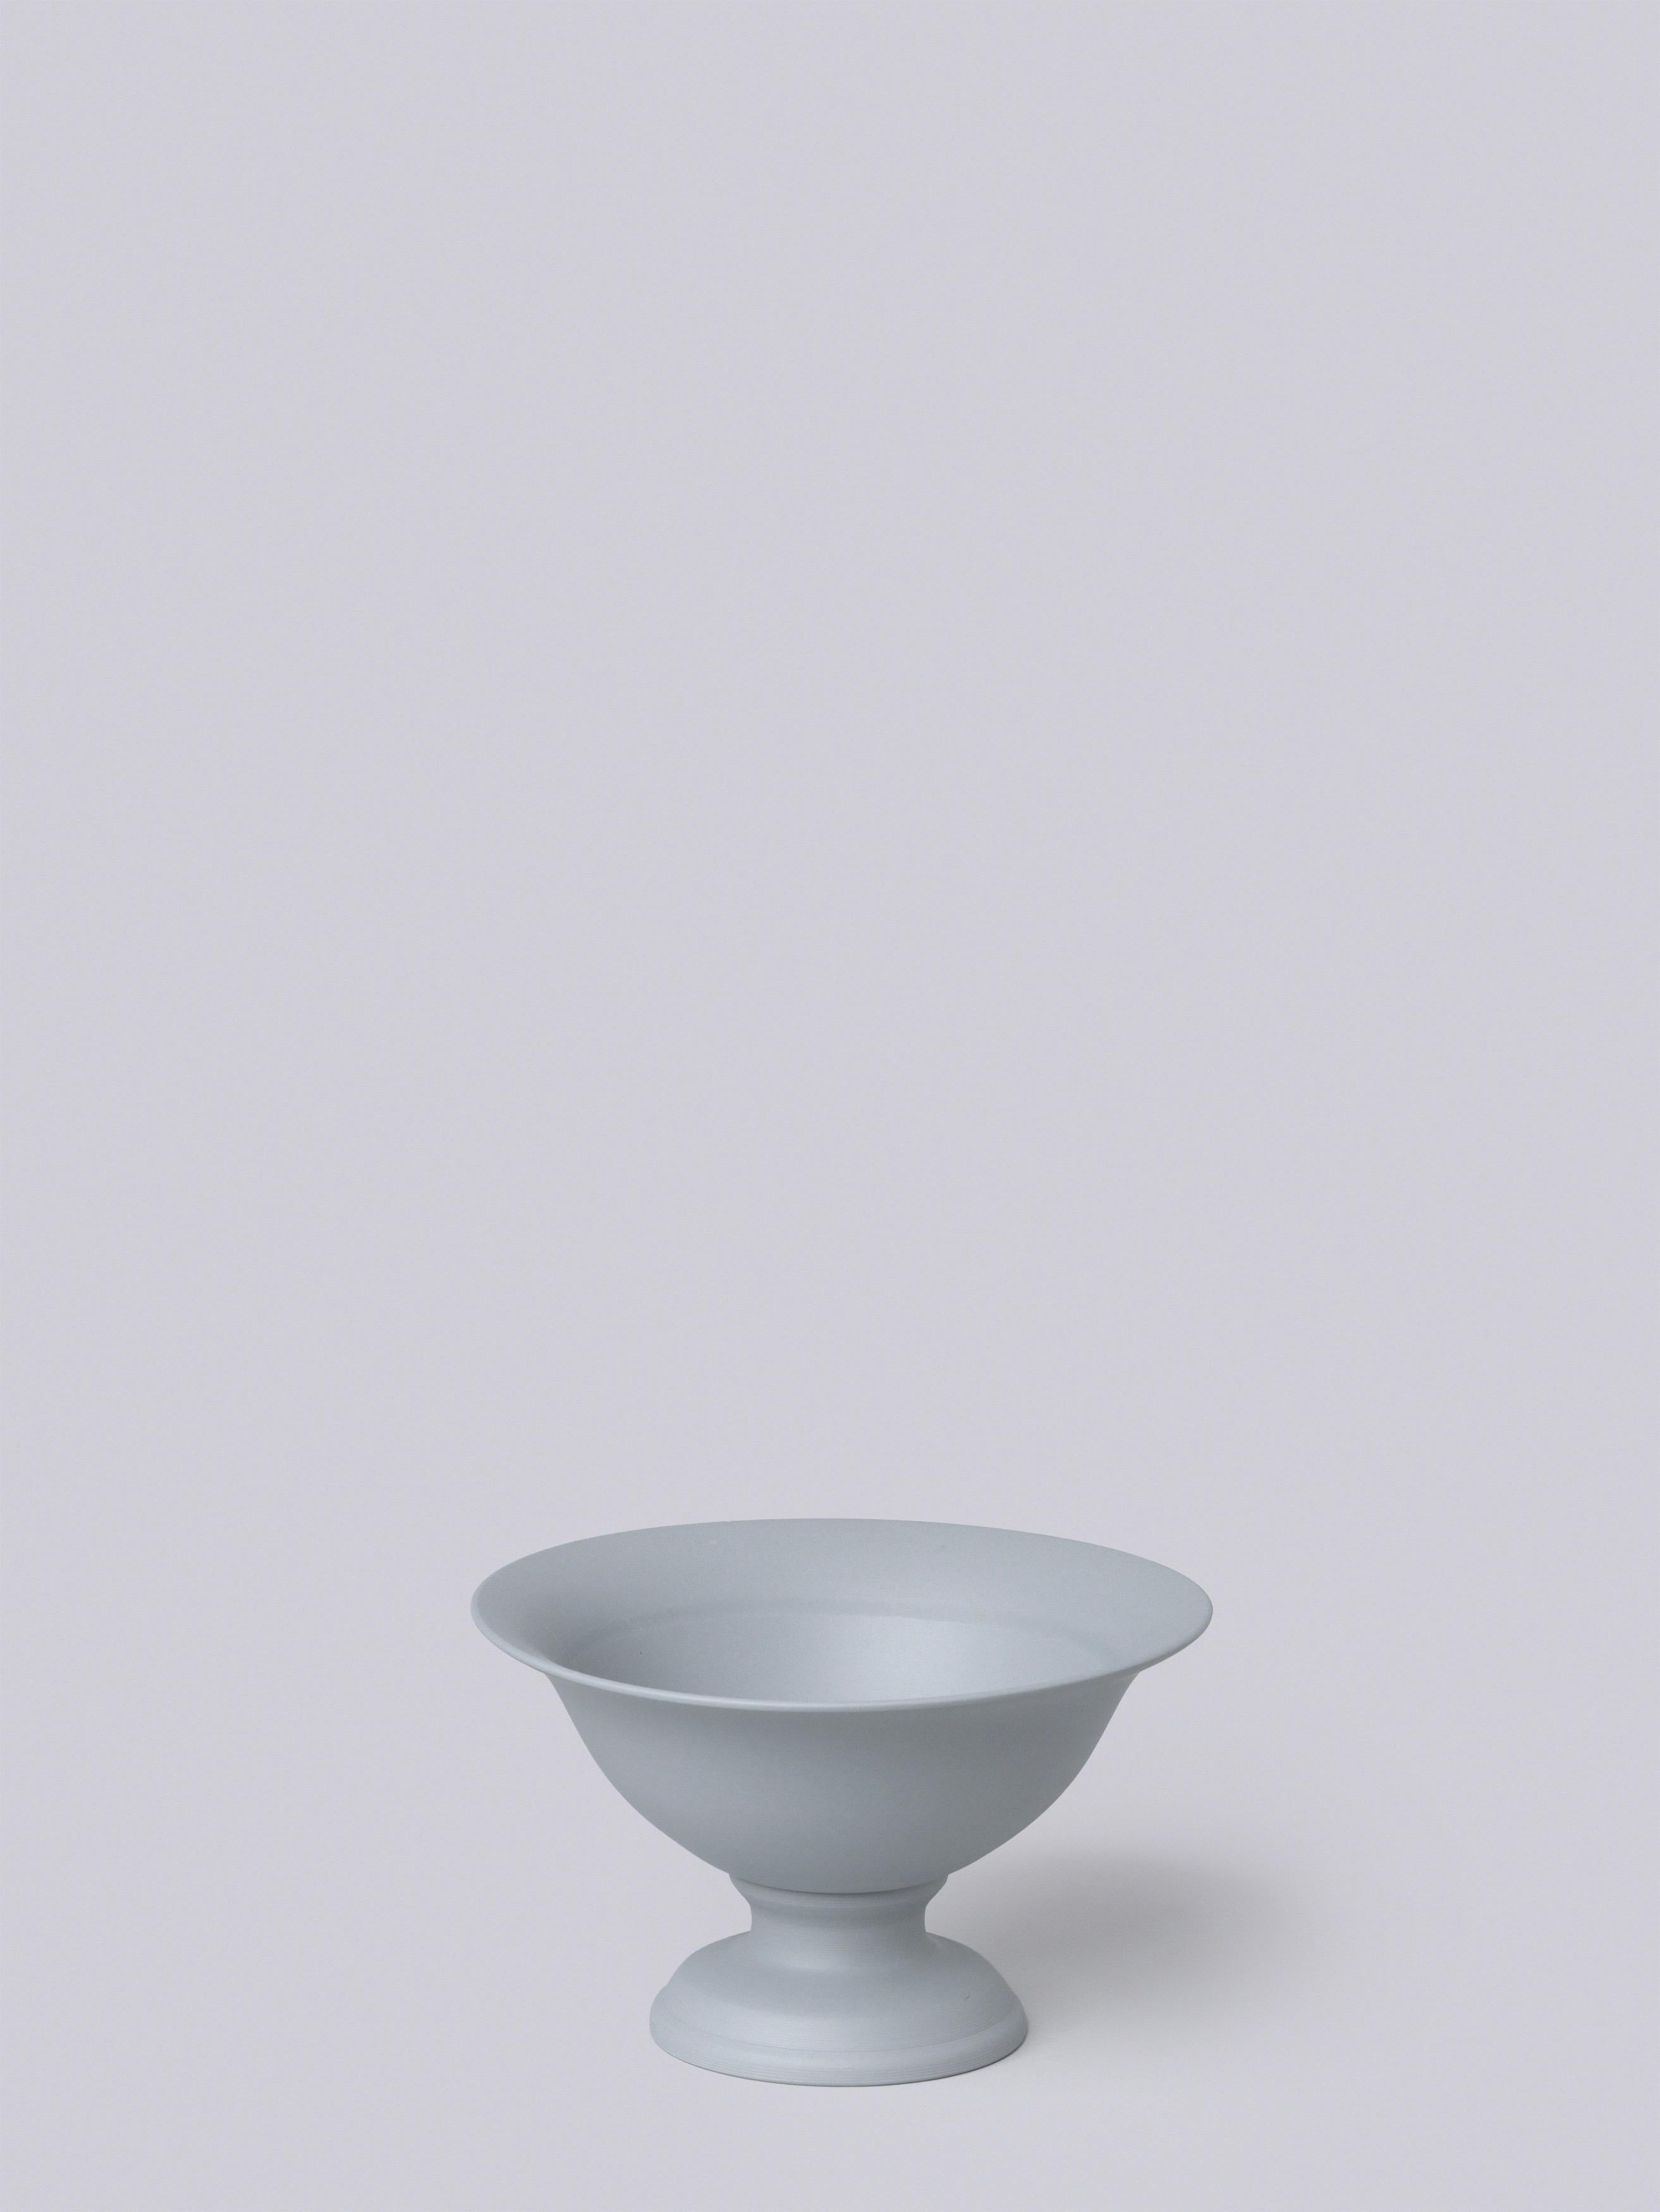 Molded Small Footed Porcelain Vaso Planter in Matte Steel Grey